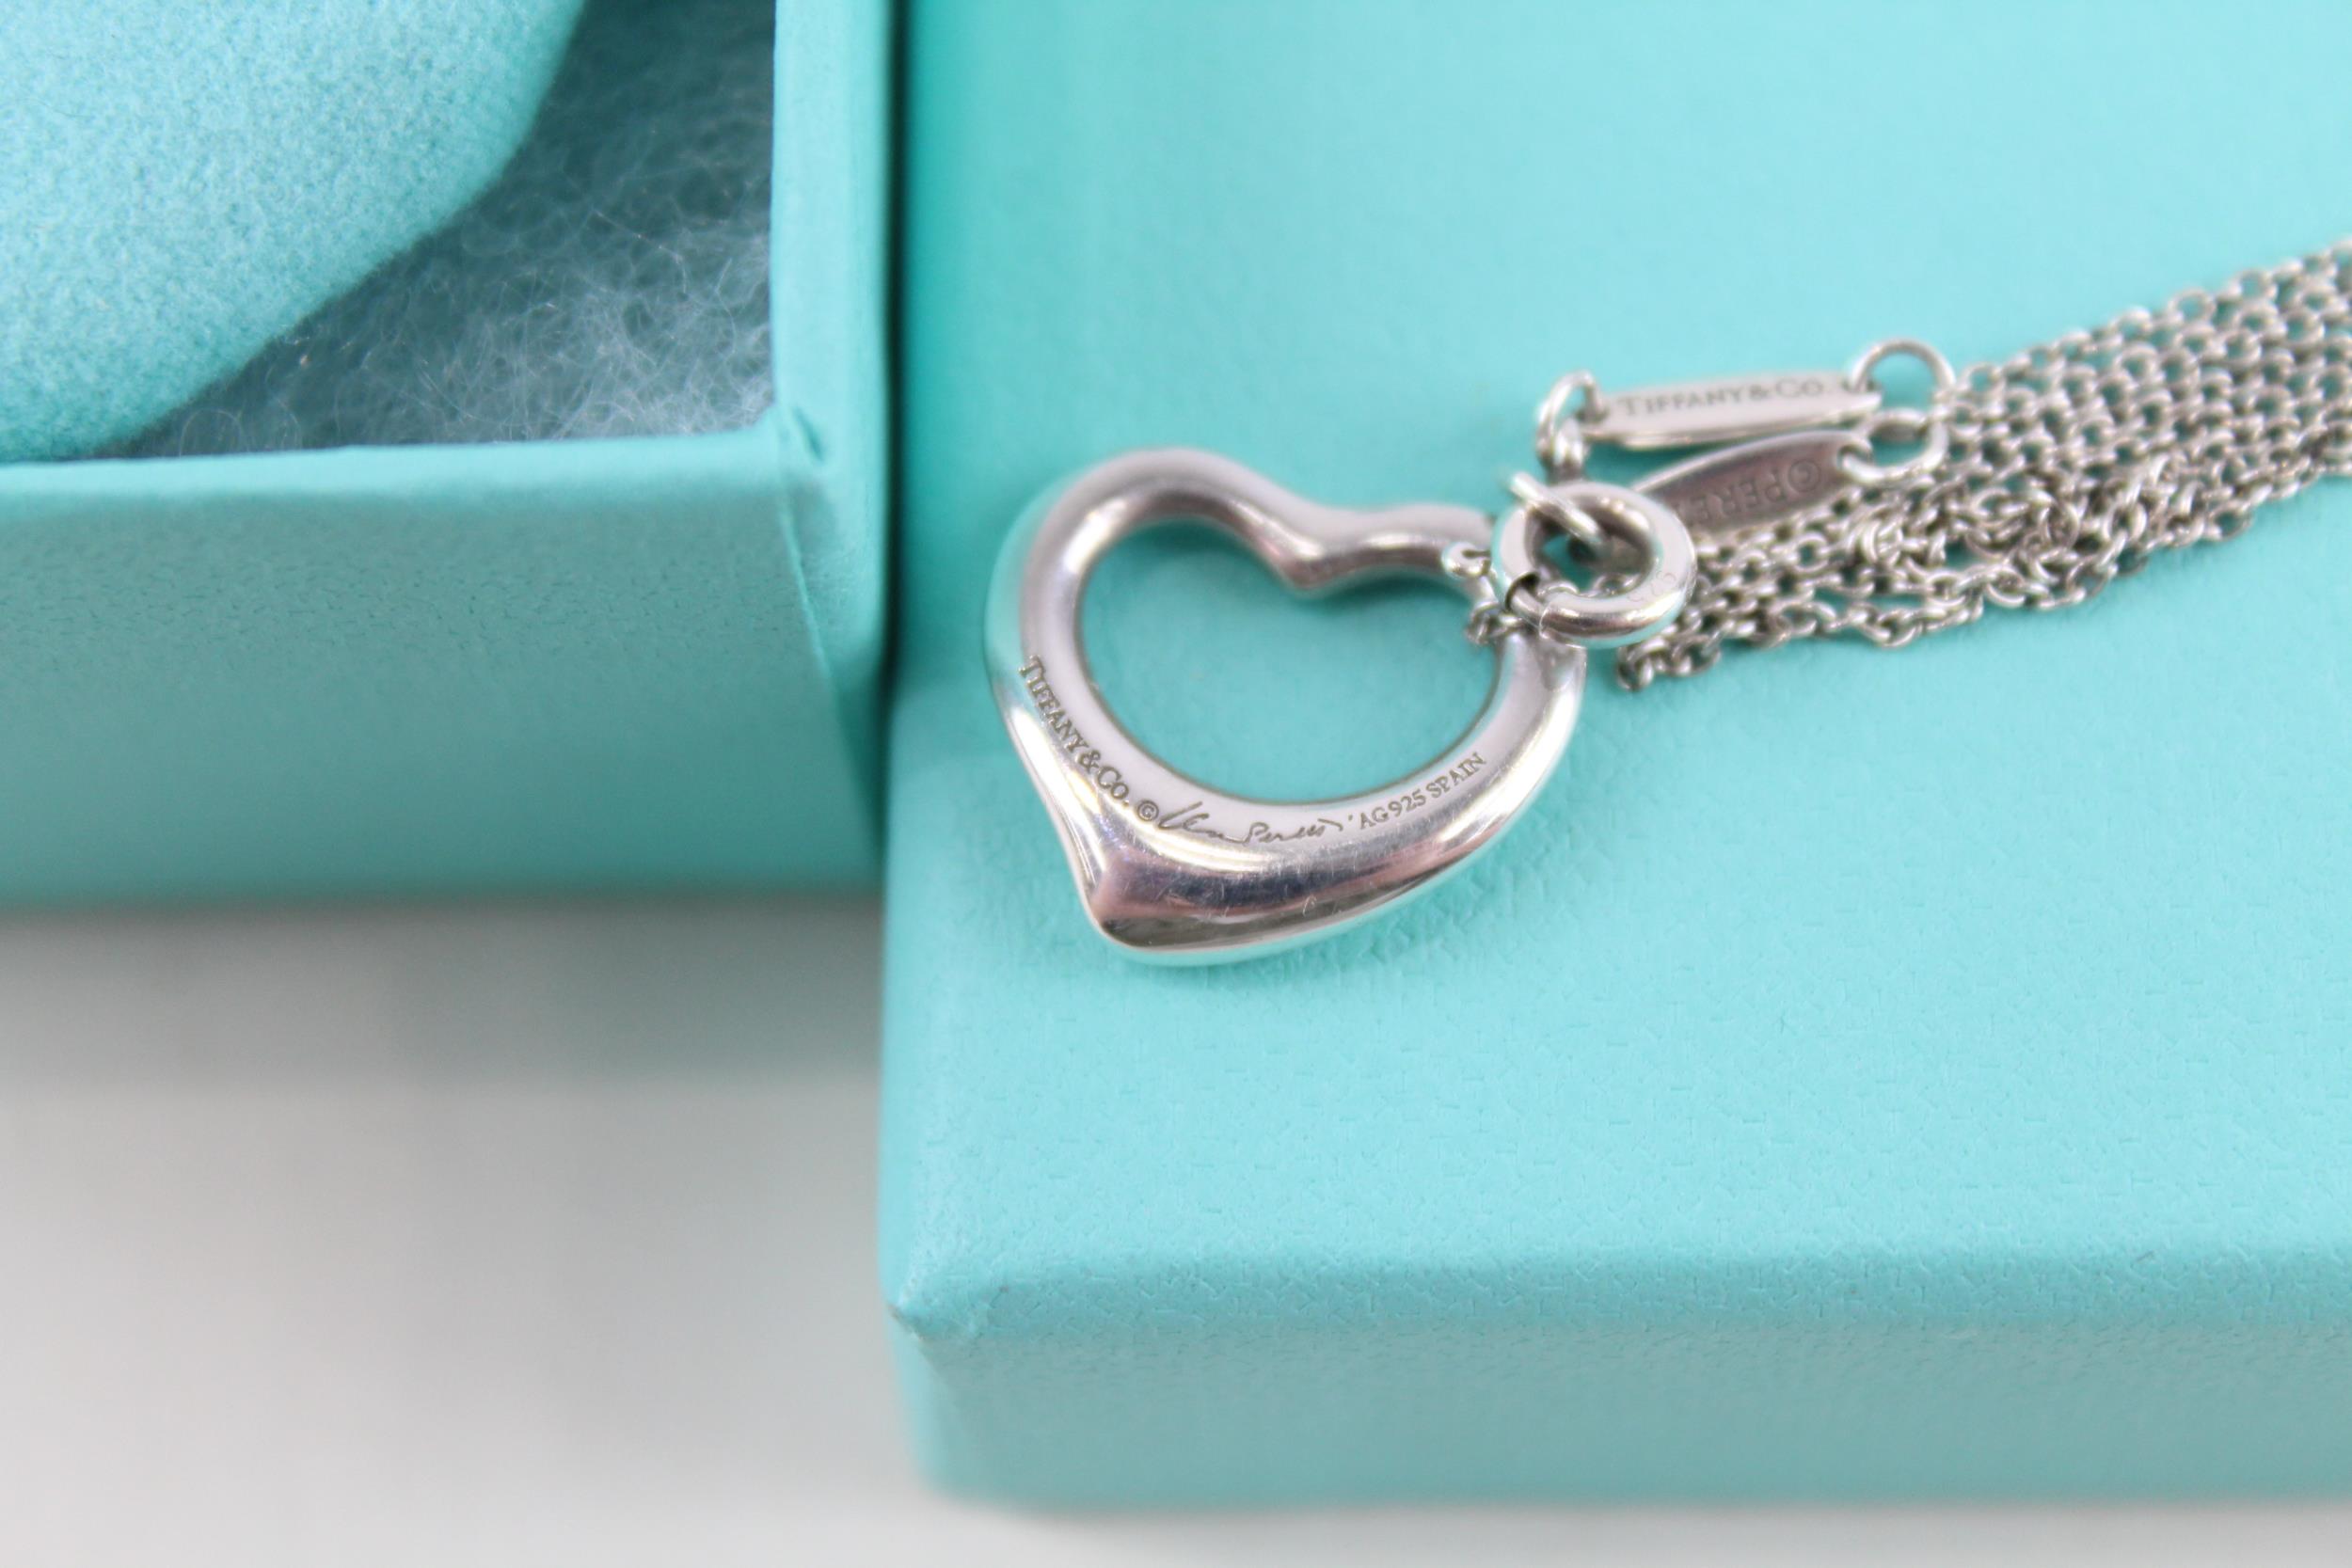 A silver heart pendant necklace by Elsa Peretti for Tiffany and Co (4g) - Image 4 of 5